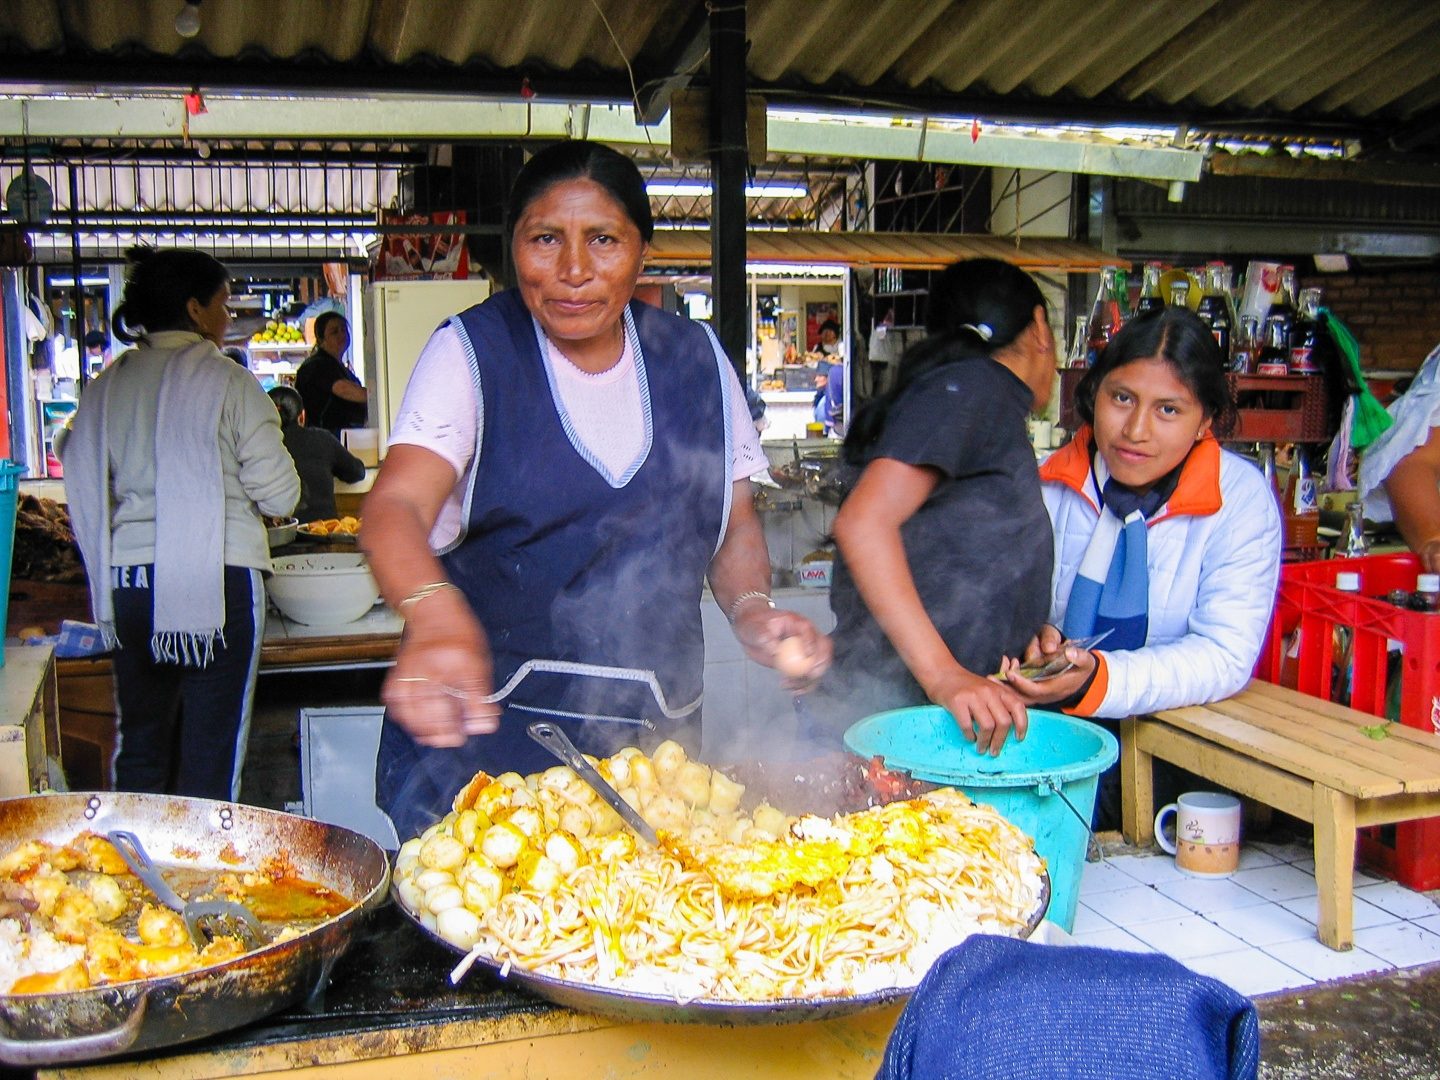 In Otavalo, a woman at a kitchen in the market complemented Ernie’s Spanish, asked if he had a home, a car and a job. His positive answers to her questions caused her to summon Maria who the woman told him could “cook, clean, make a nice wife and bear healthy children.” He doesn’t don’t remember how he got out of that situation.